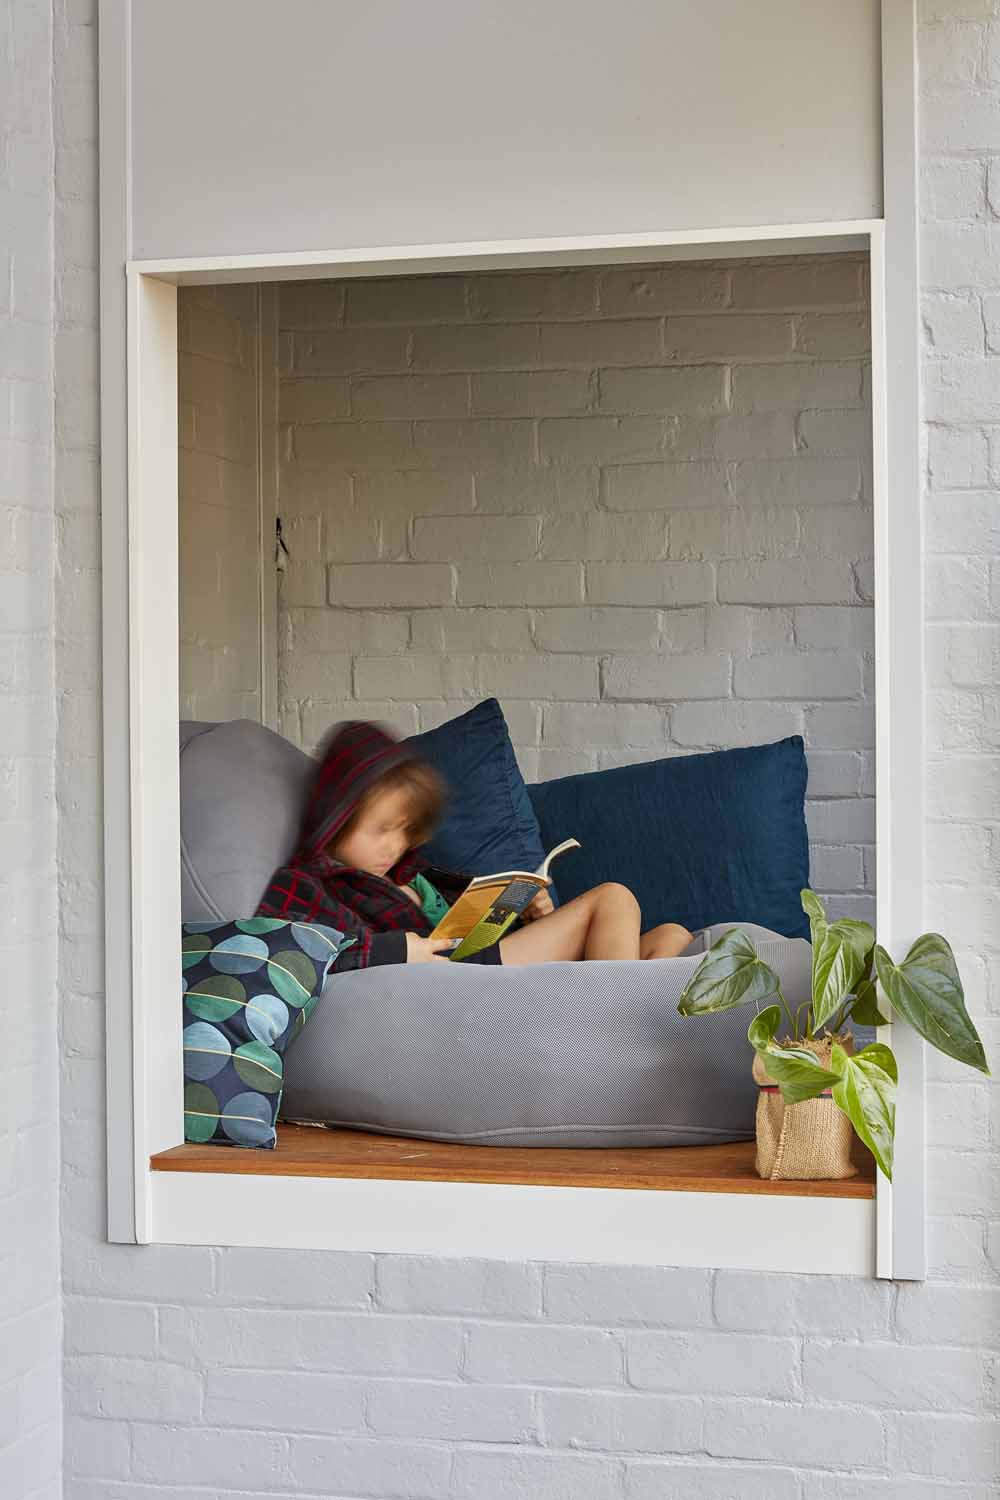 Outdoor Living - Connected Design. Marrickville